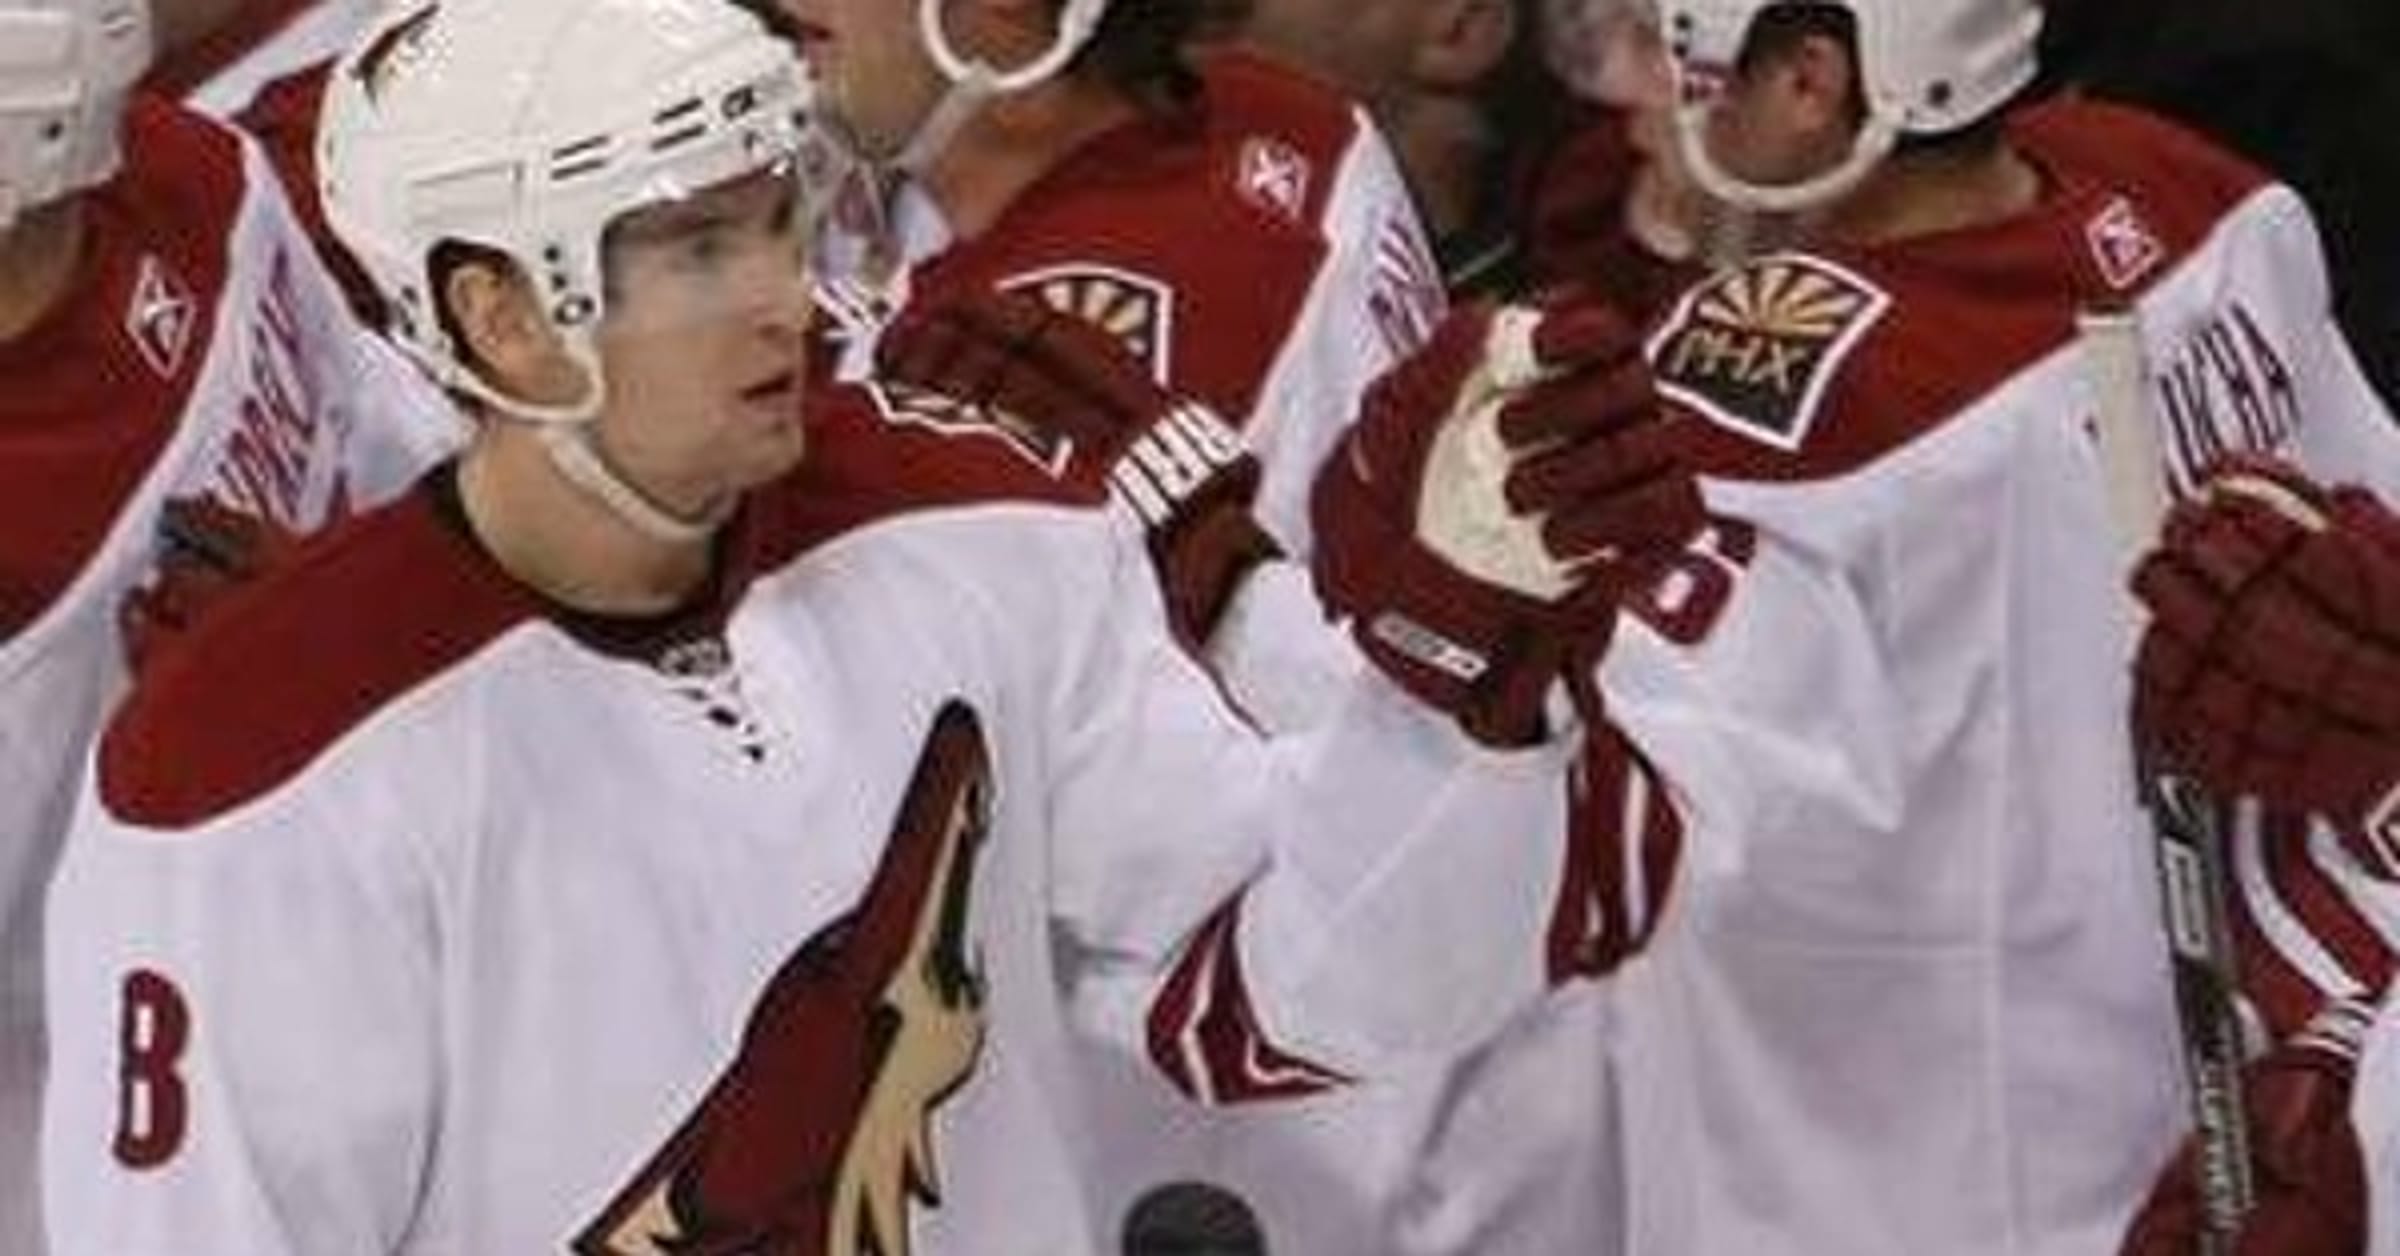 Ranking the top 10 Arizona Coyotes players of all time